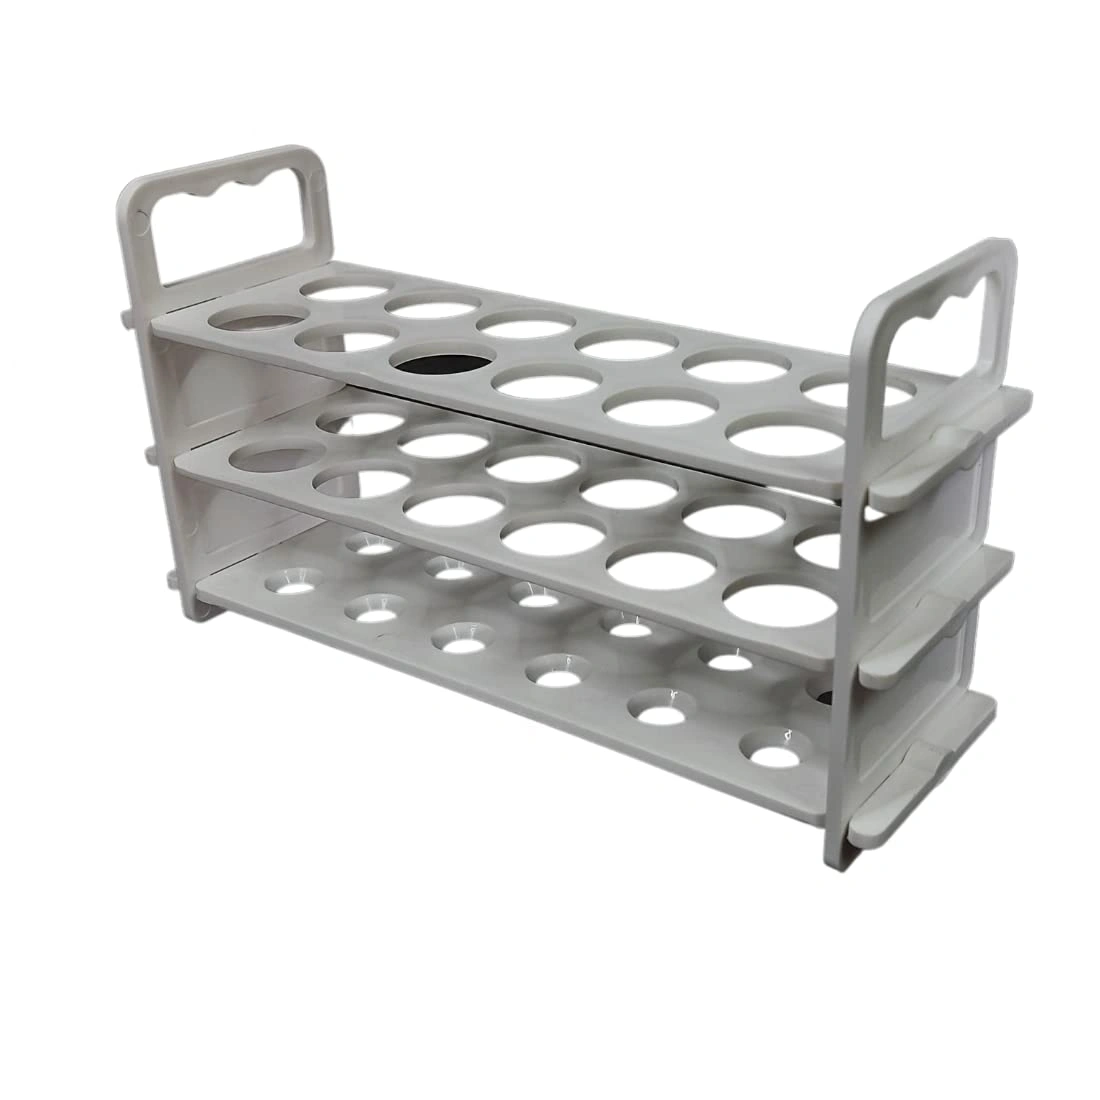 Test tube stand 3 TIER: 25mm × 12 Holes (Pack of 1)-4